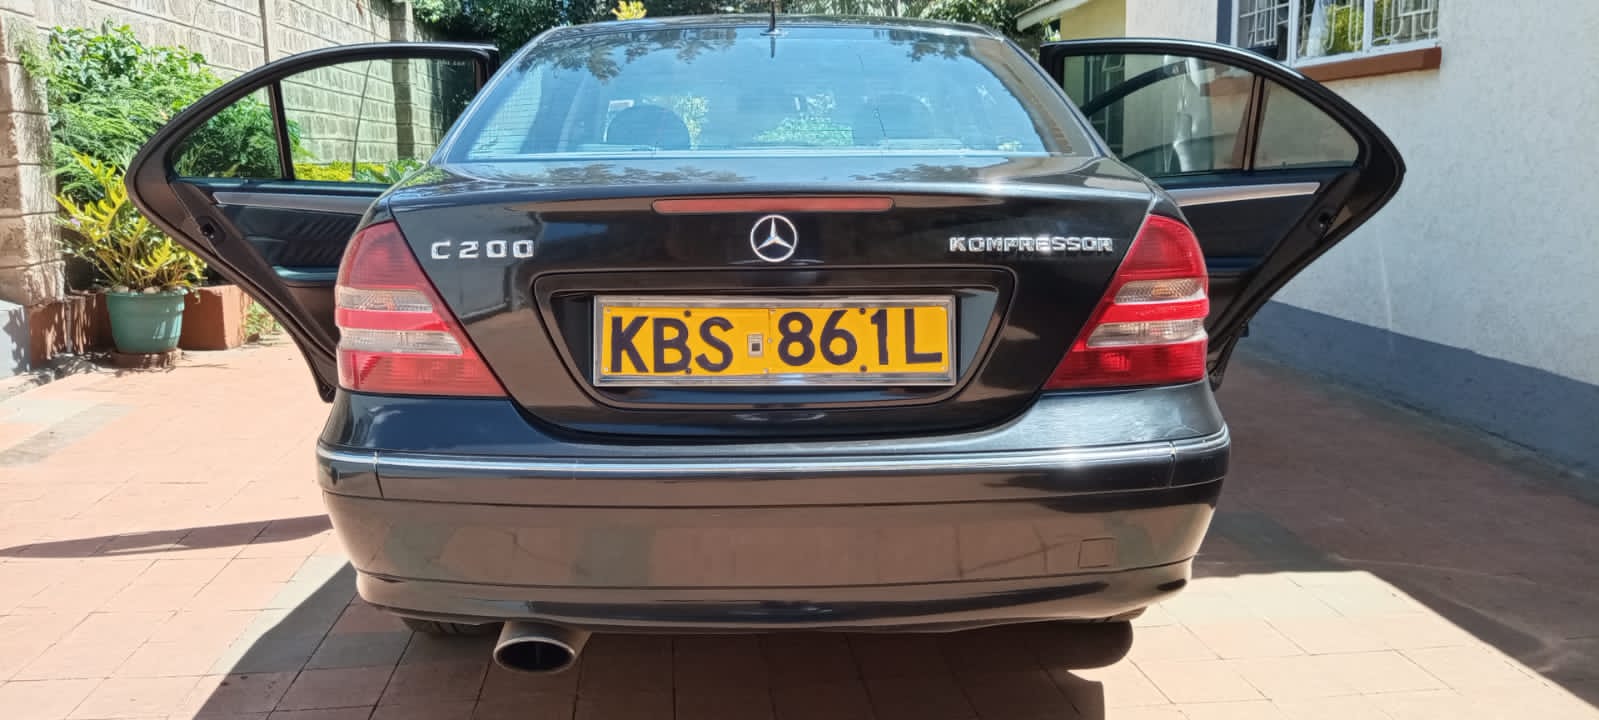 Mercedes Benz C200 You Pay 30% DEPOSIT Trade in OK EXCLUSIVE